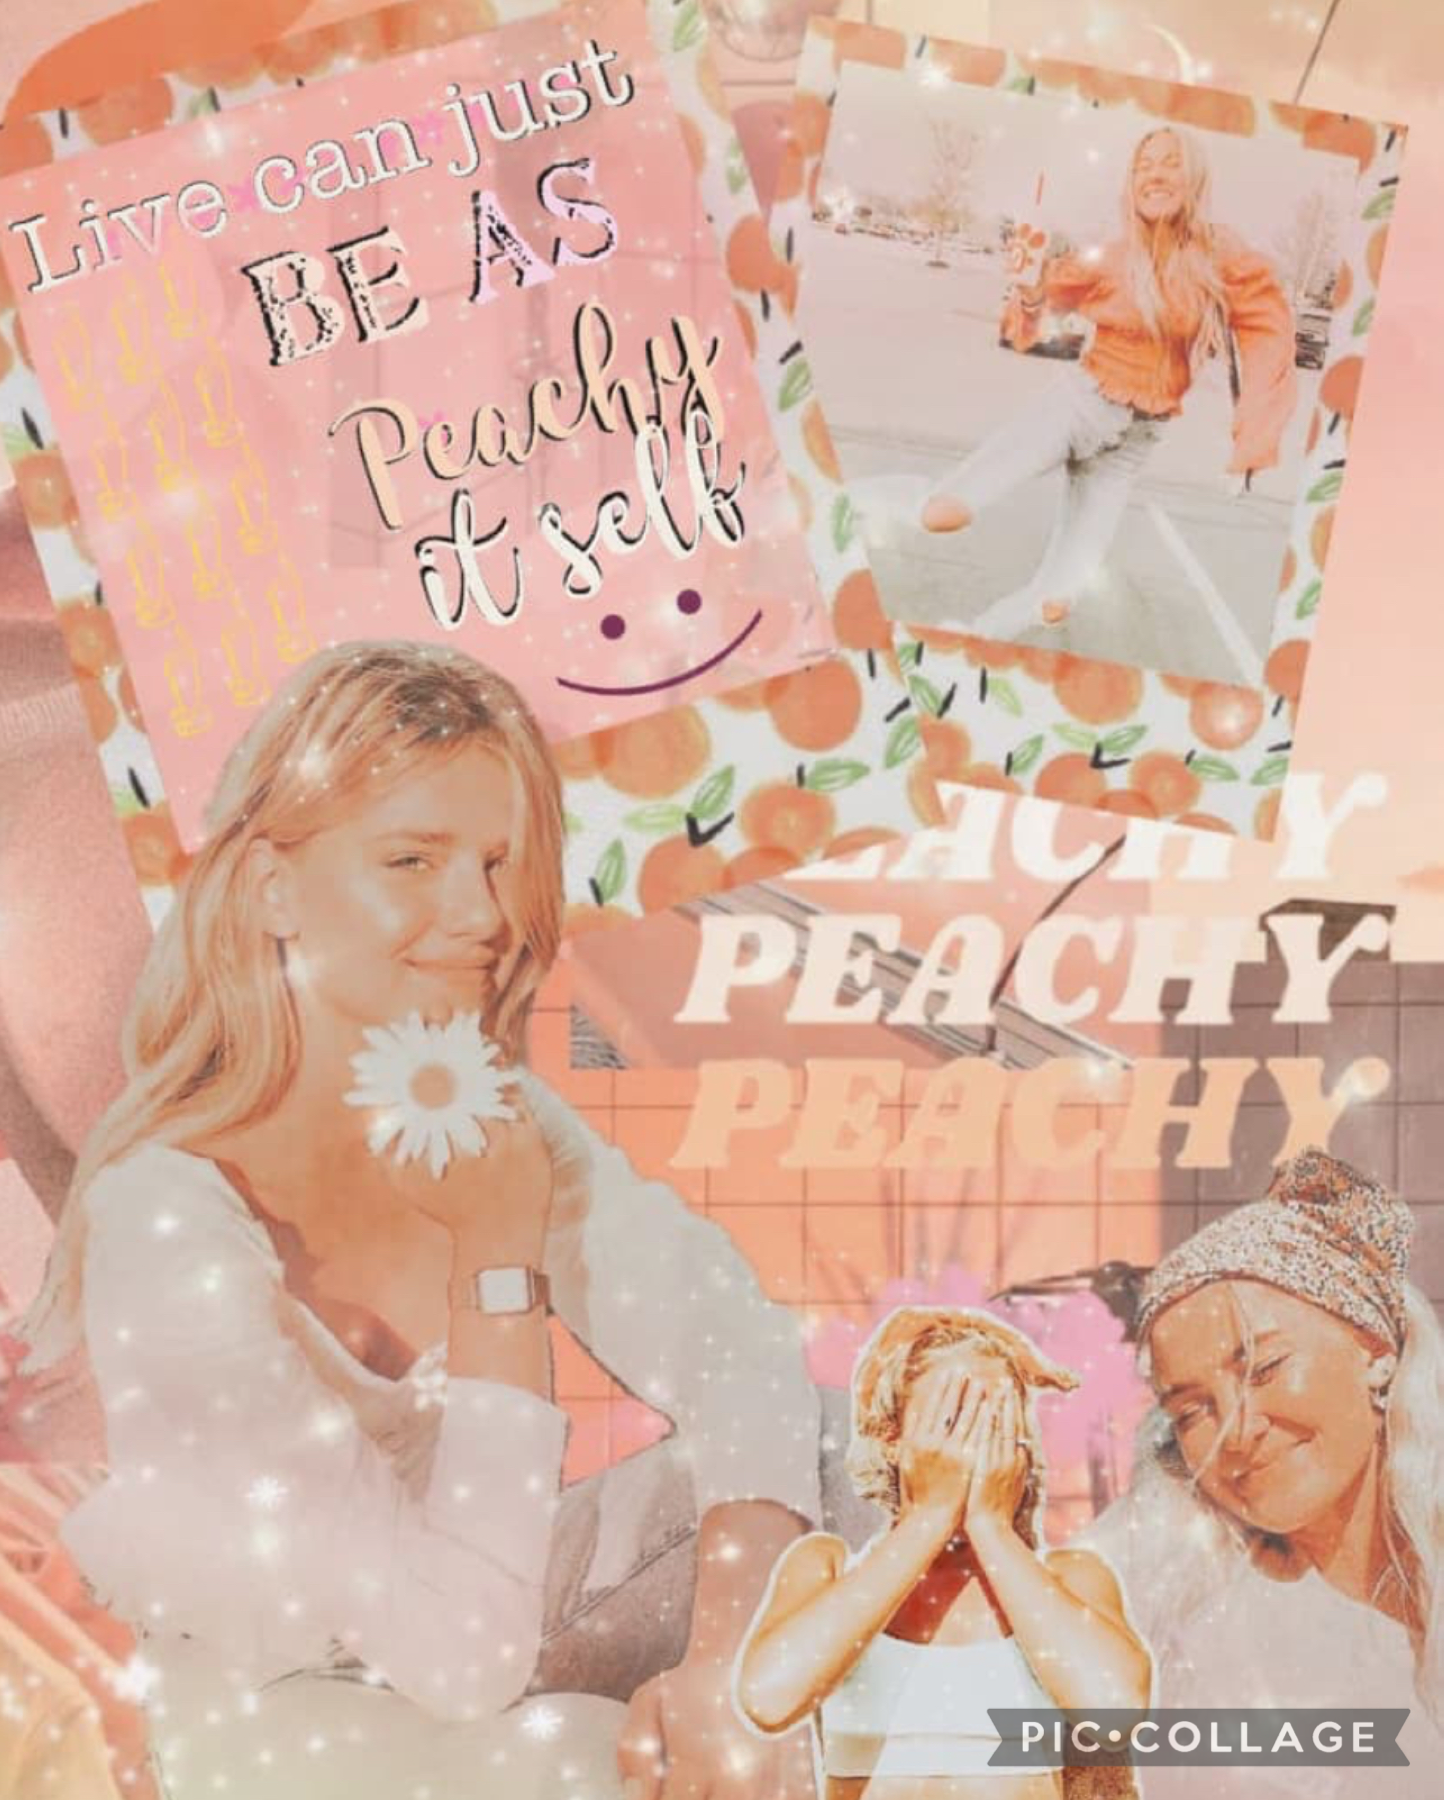 🌸tap🌸
🌸collab with mintflowers!🌸
Peachy aesthetic!🍑🌸